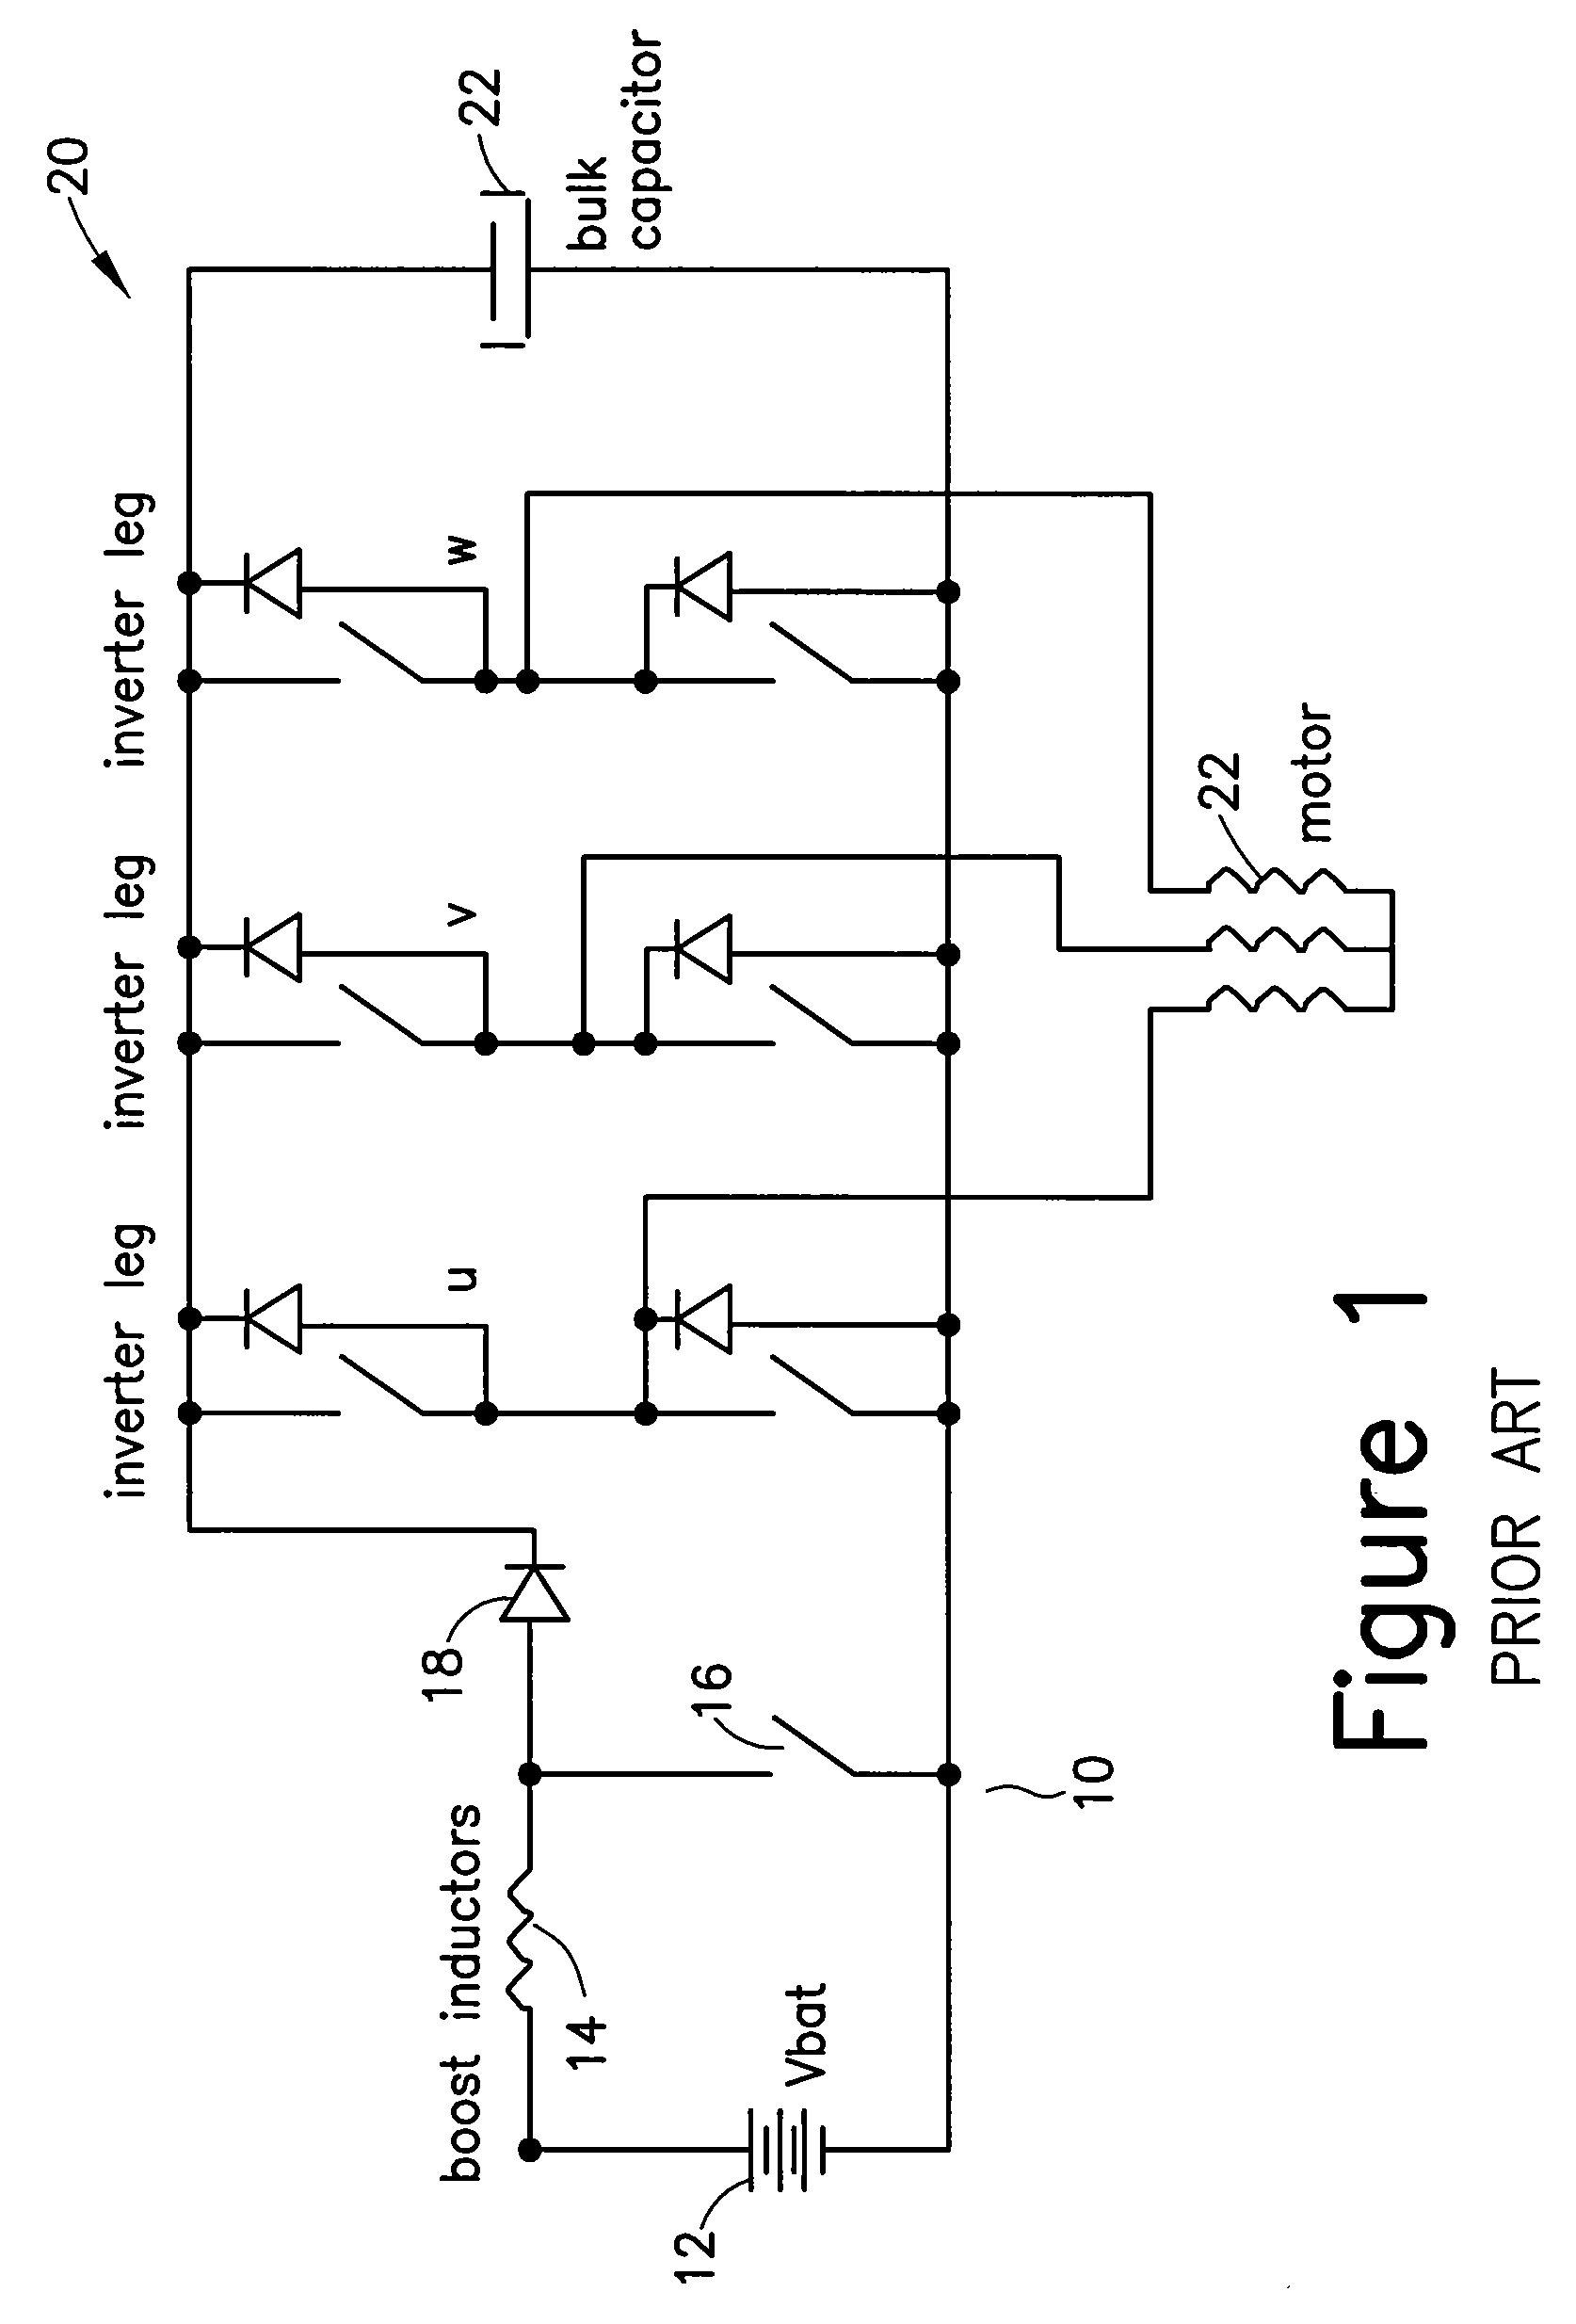 Single stage integrated boost inverter motor drive circuit